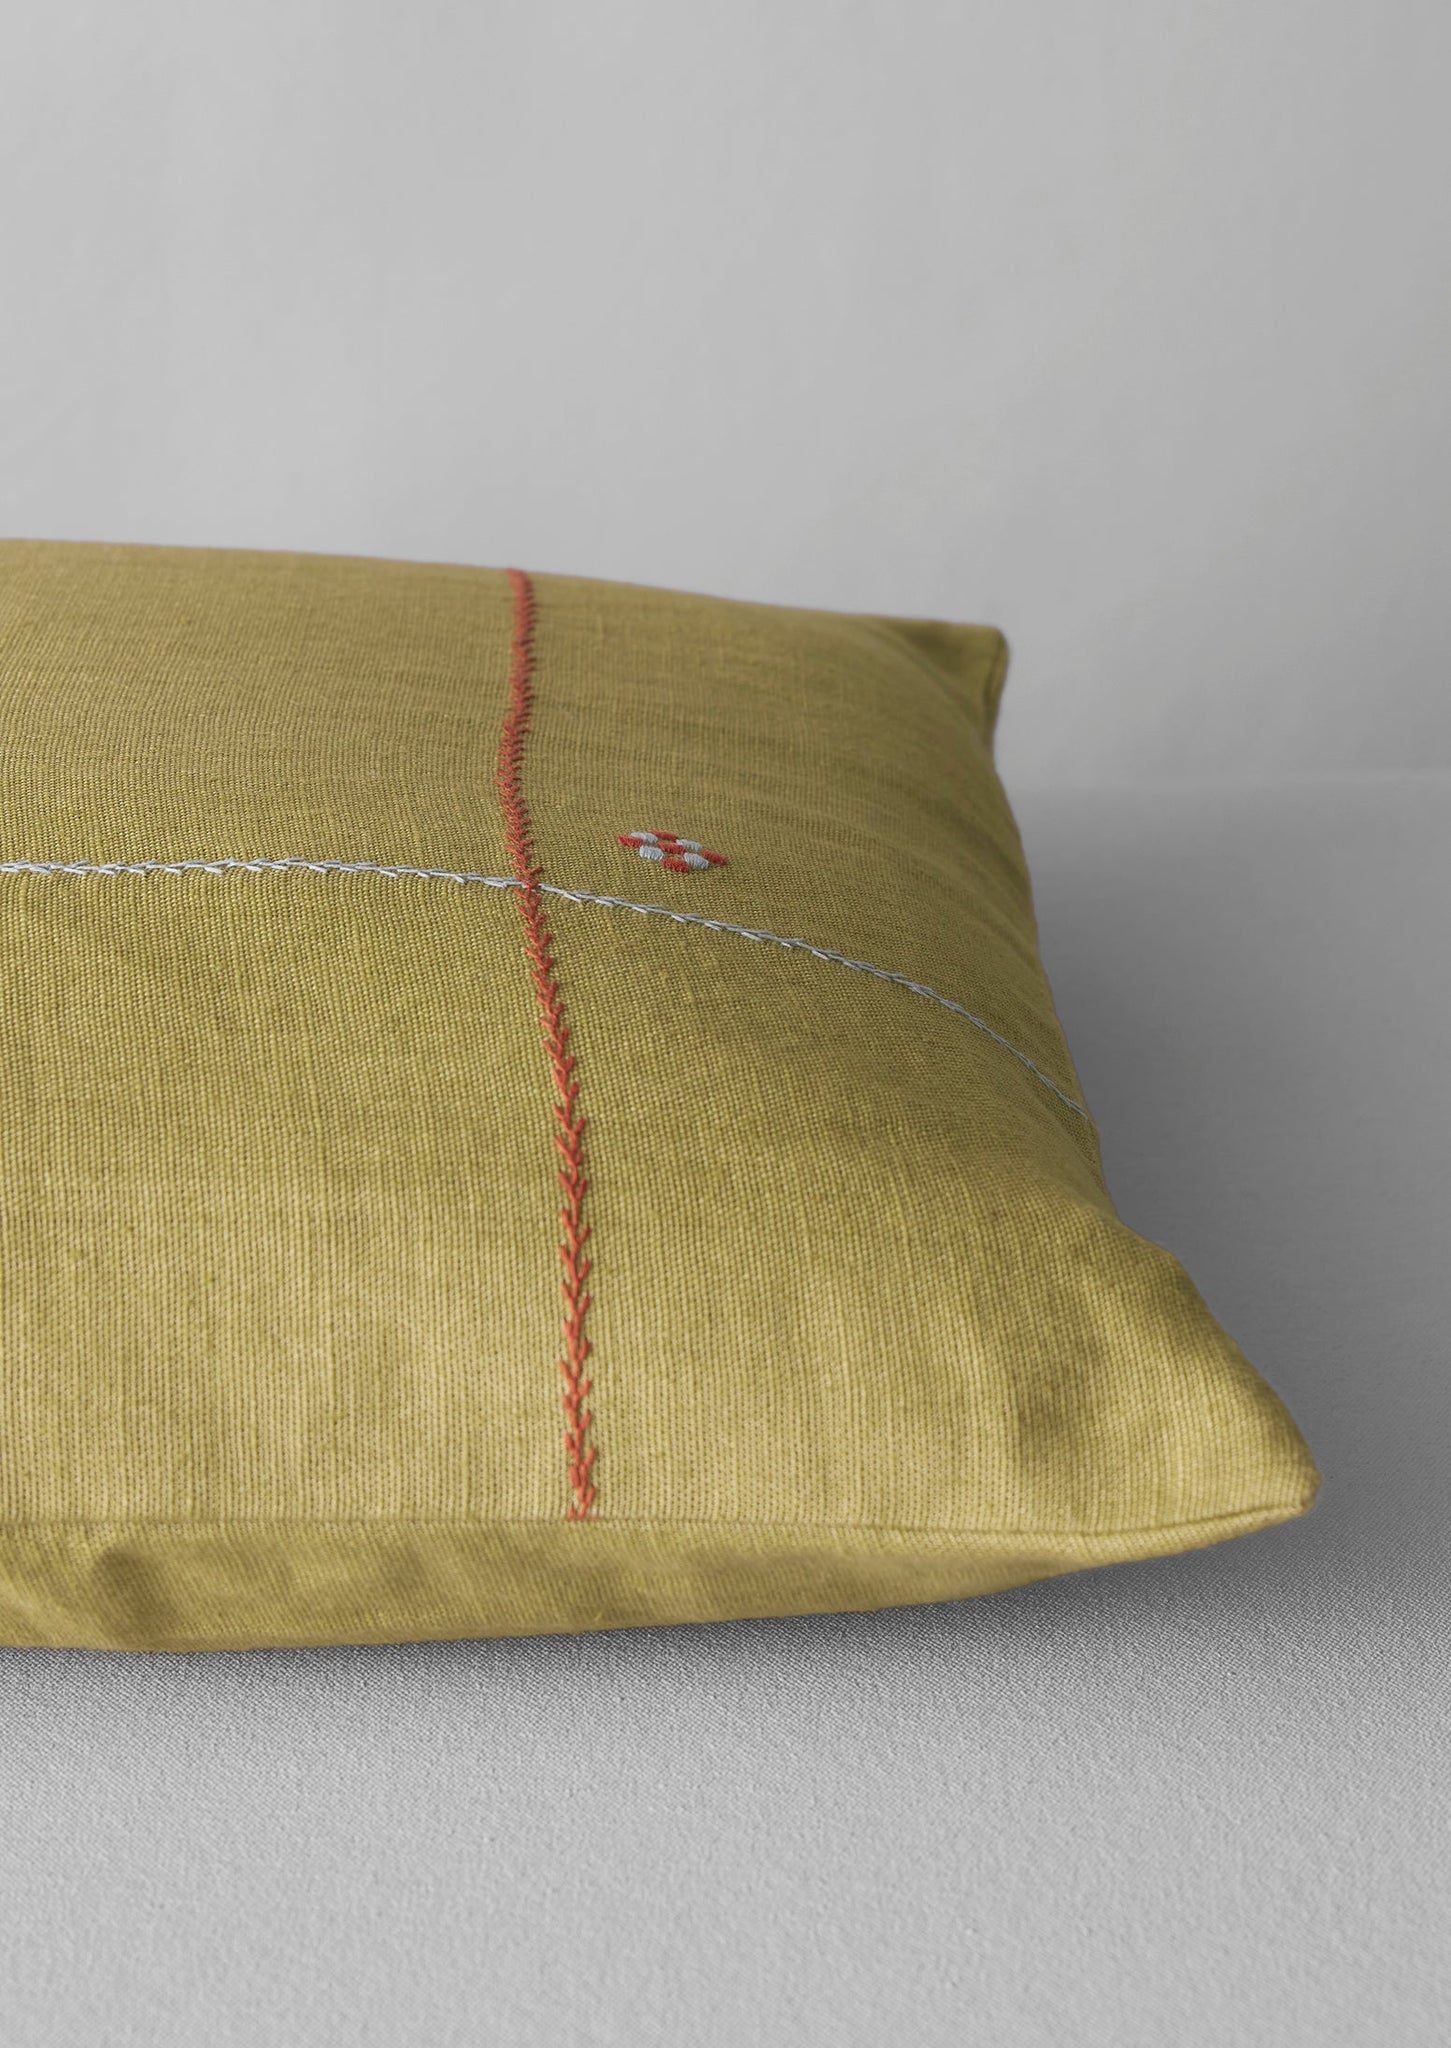 Embroidered Linen Square Pillow Cover | Flax